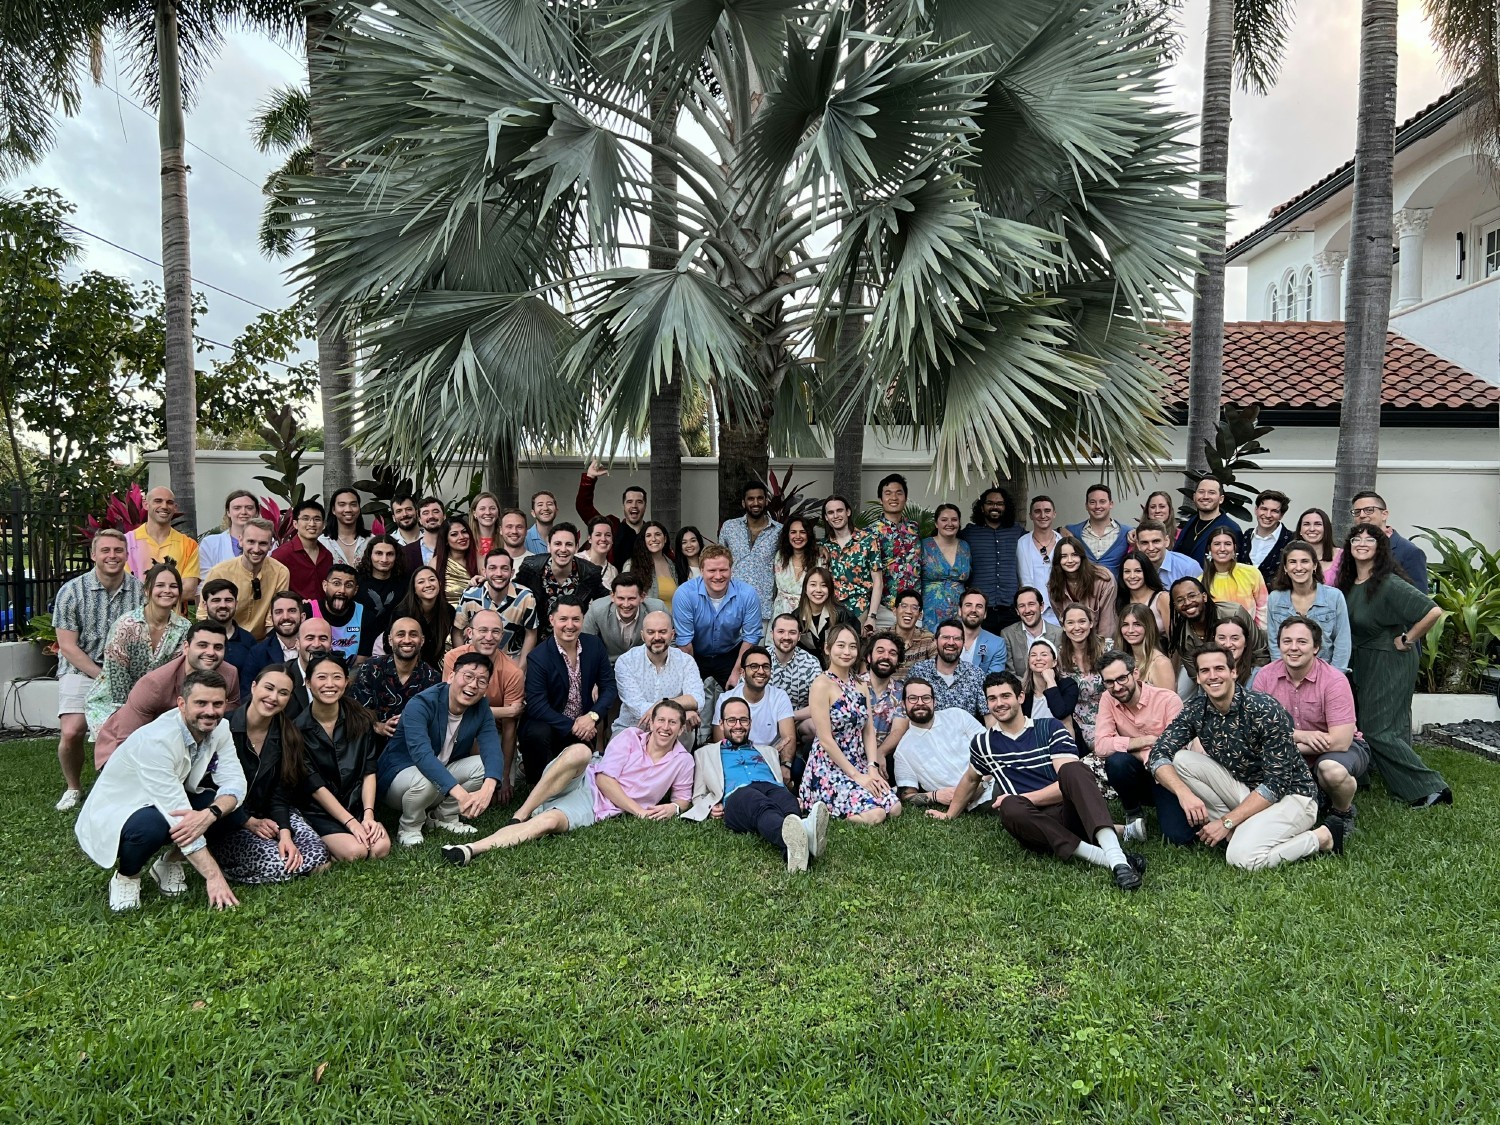 Mutineers at our February 2023 offsite in Fort Lauderdale, Florida